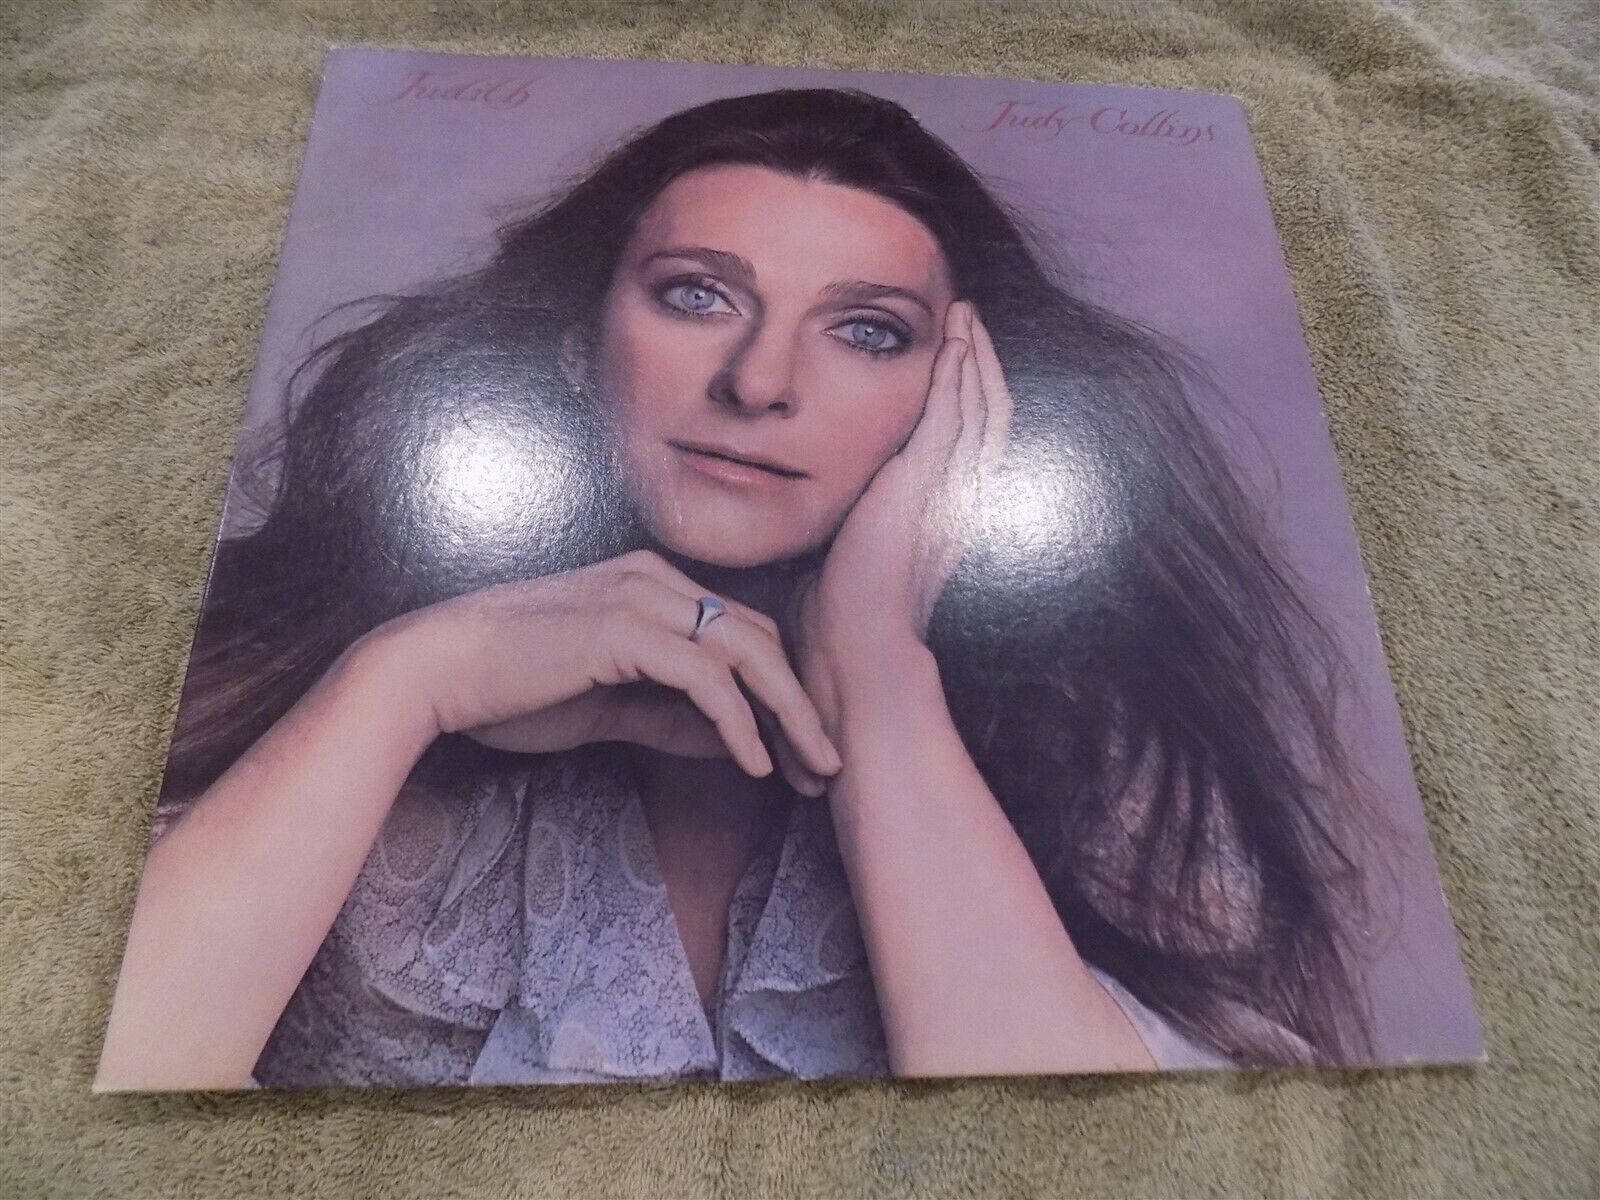 Judy Collins in an iconic pose from her 1975 Judith Album Wallpaper